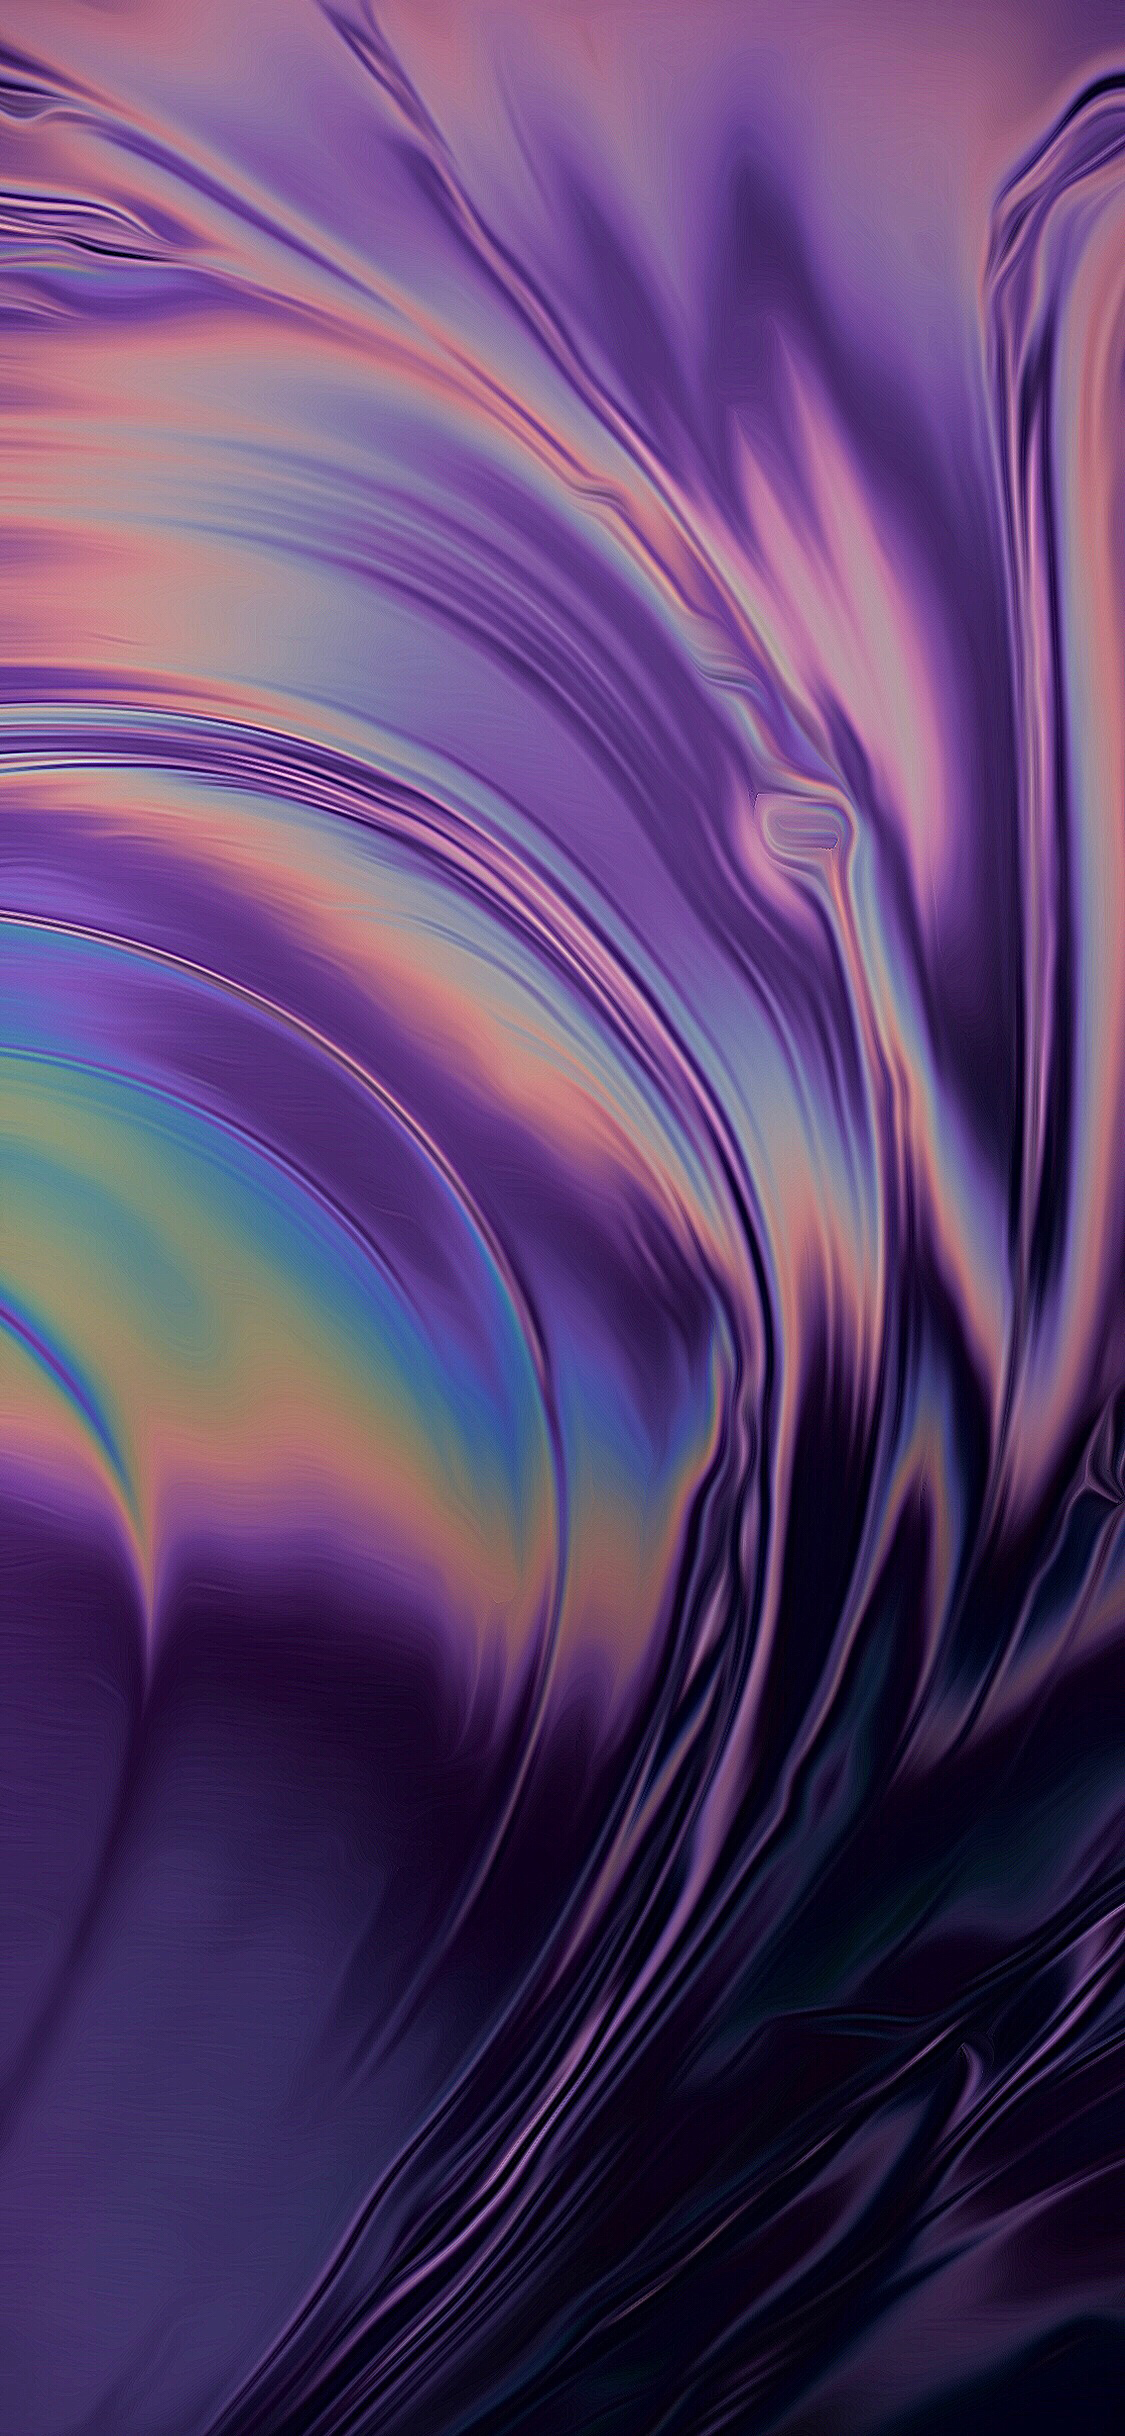 New MacBook Pro Official Wallpaper (3) - Wallpapers Central